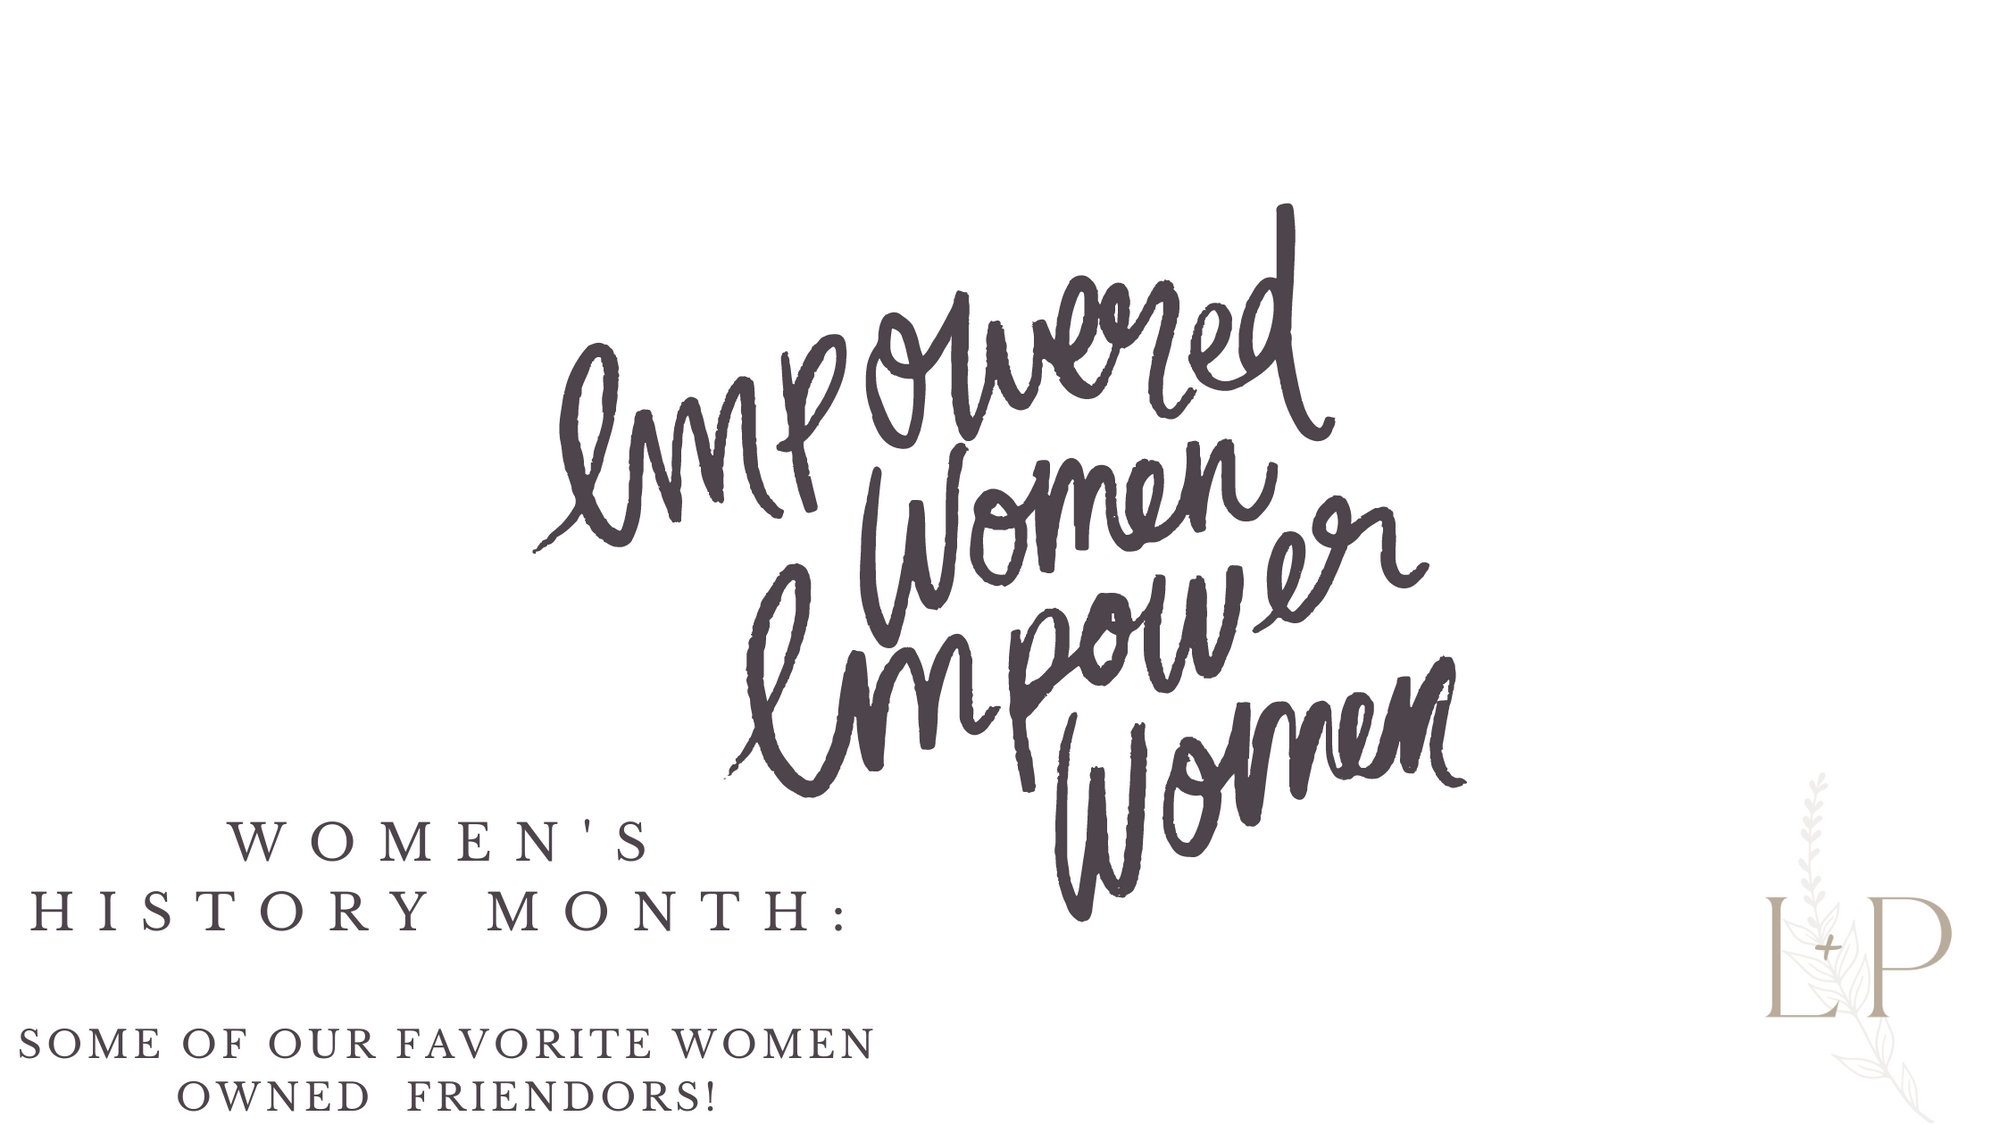 Women's History Month: Let's Highlight Some of Our Favorite Women Owned Friendors!